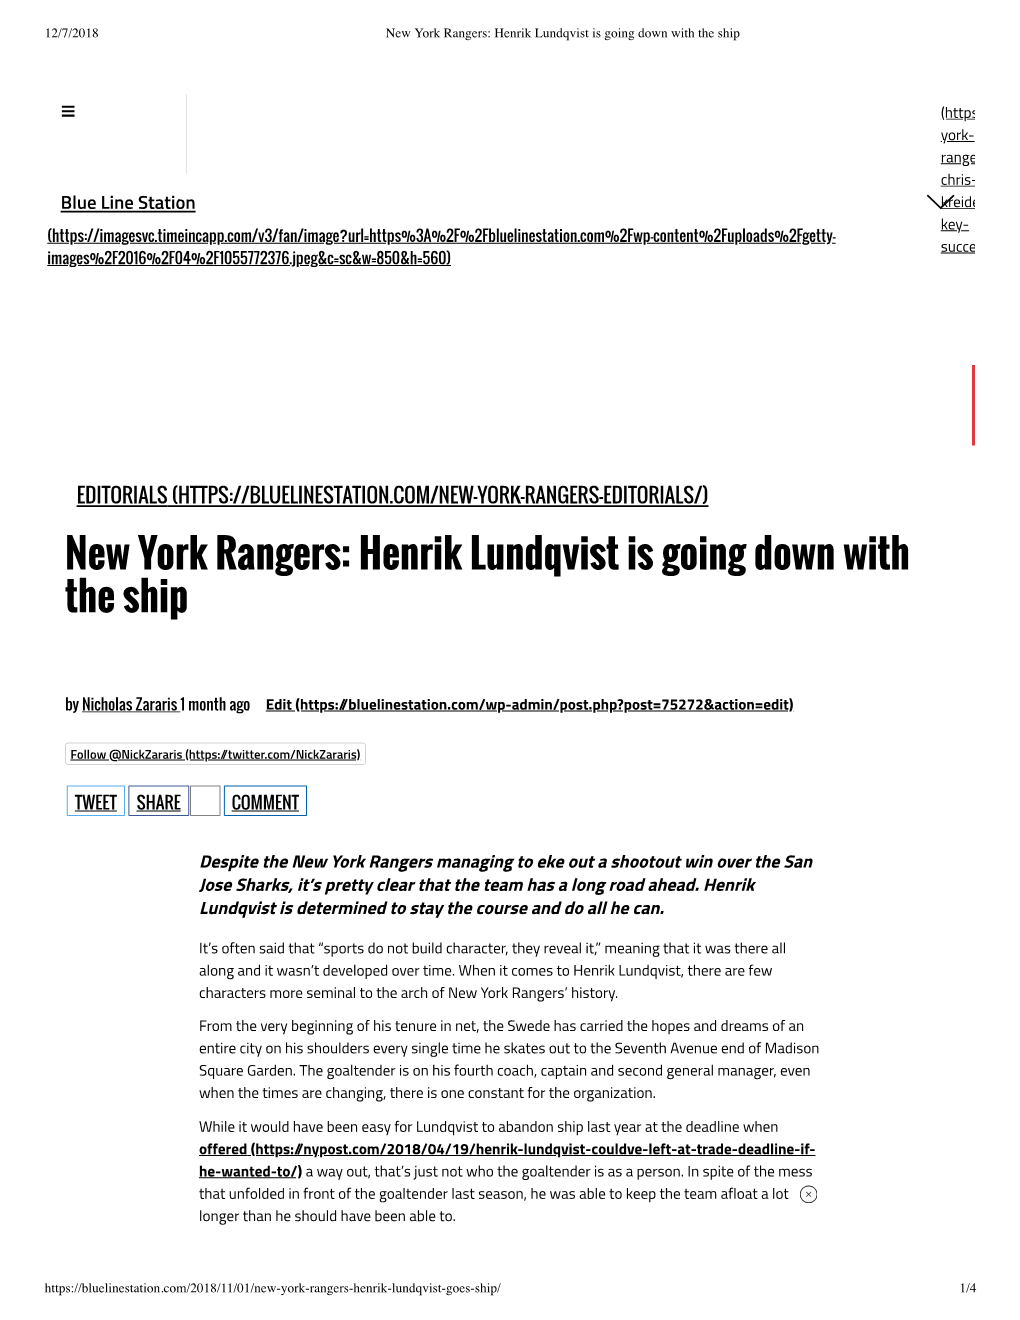 New York Rangers: Henrik Lundqvist Is Going Down with the Ship